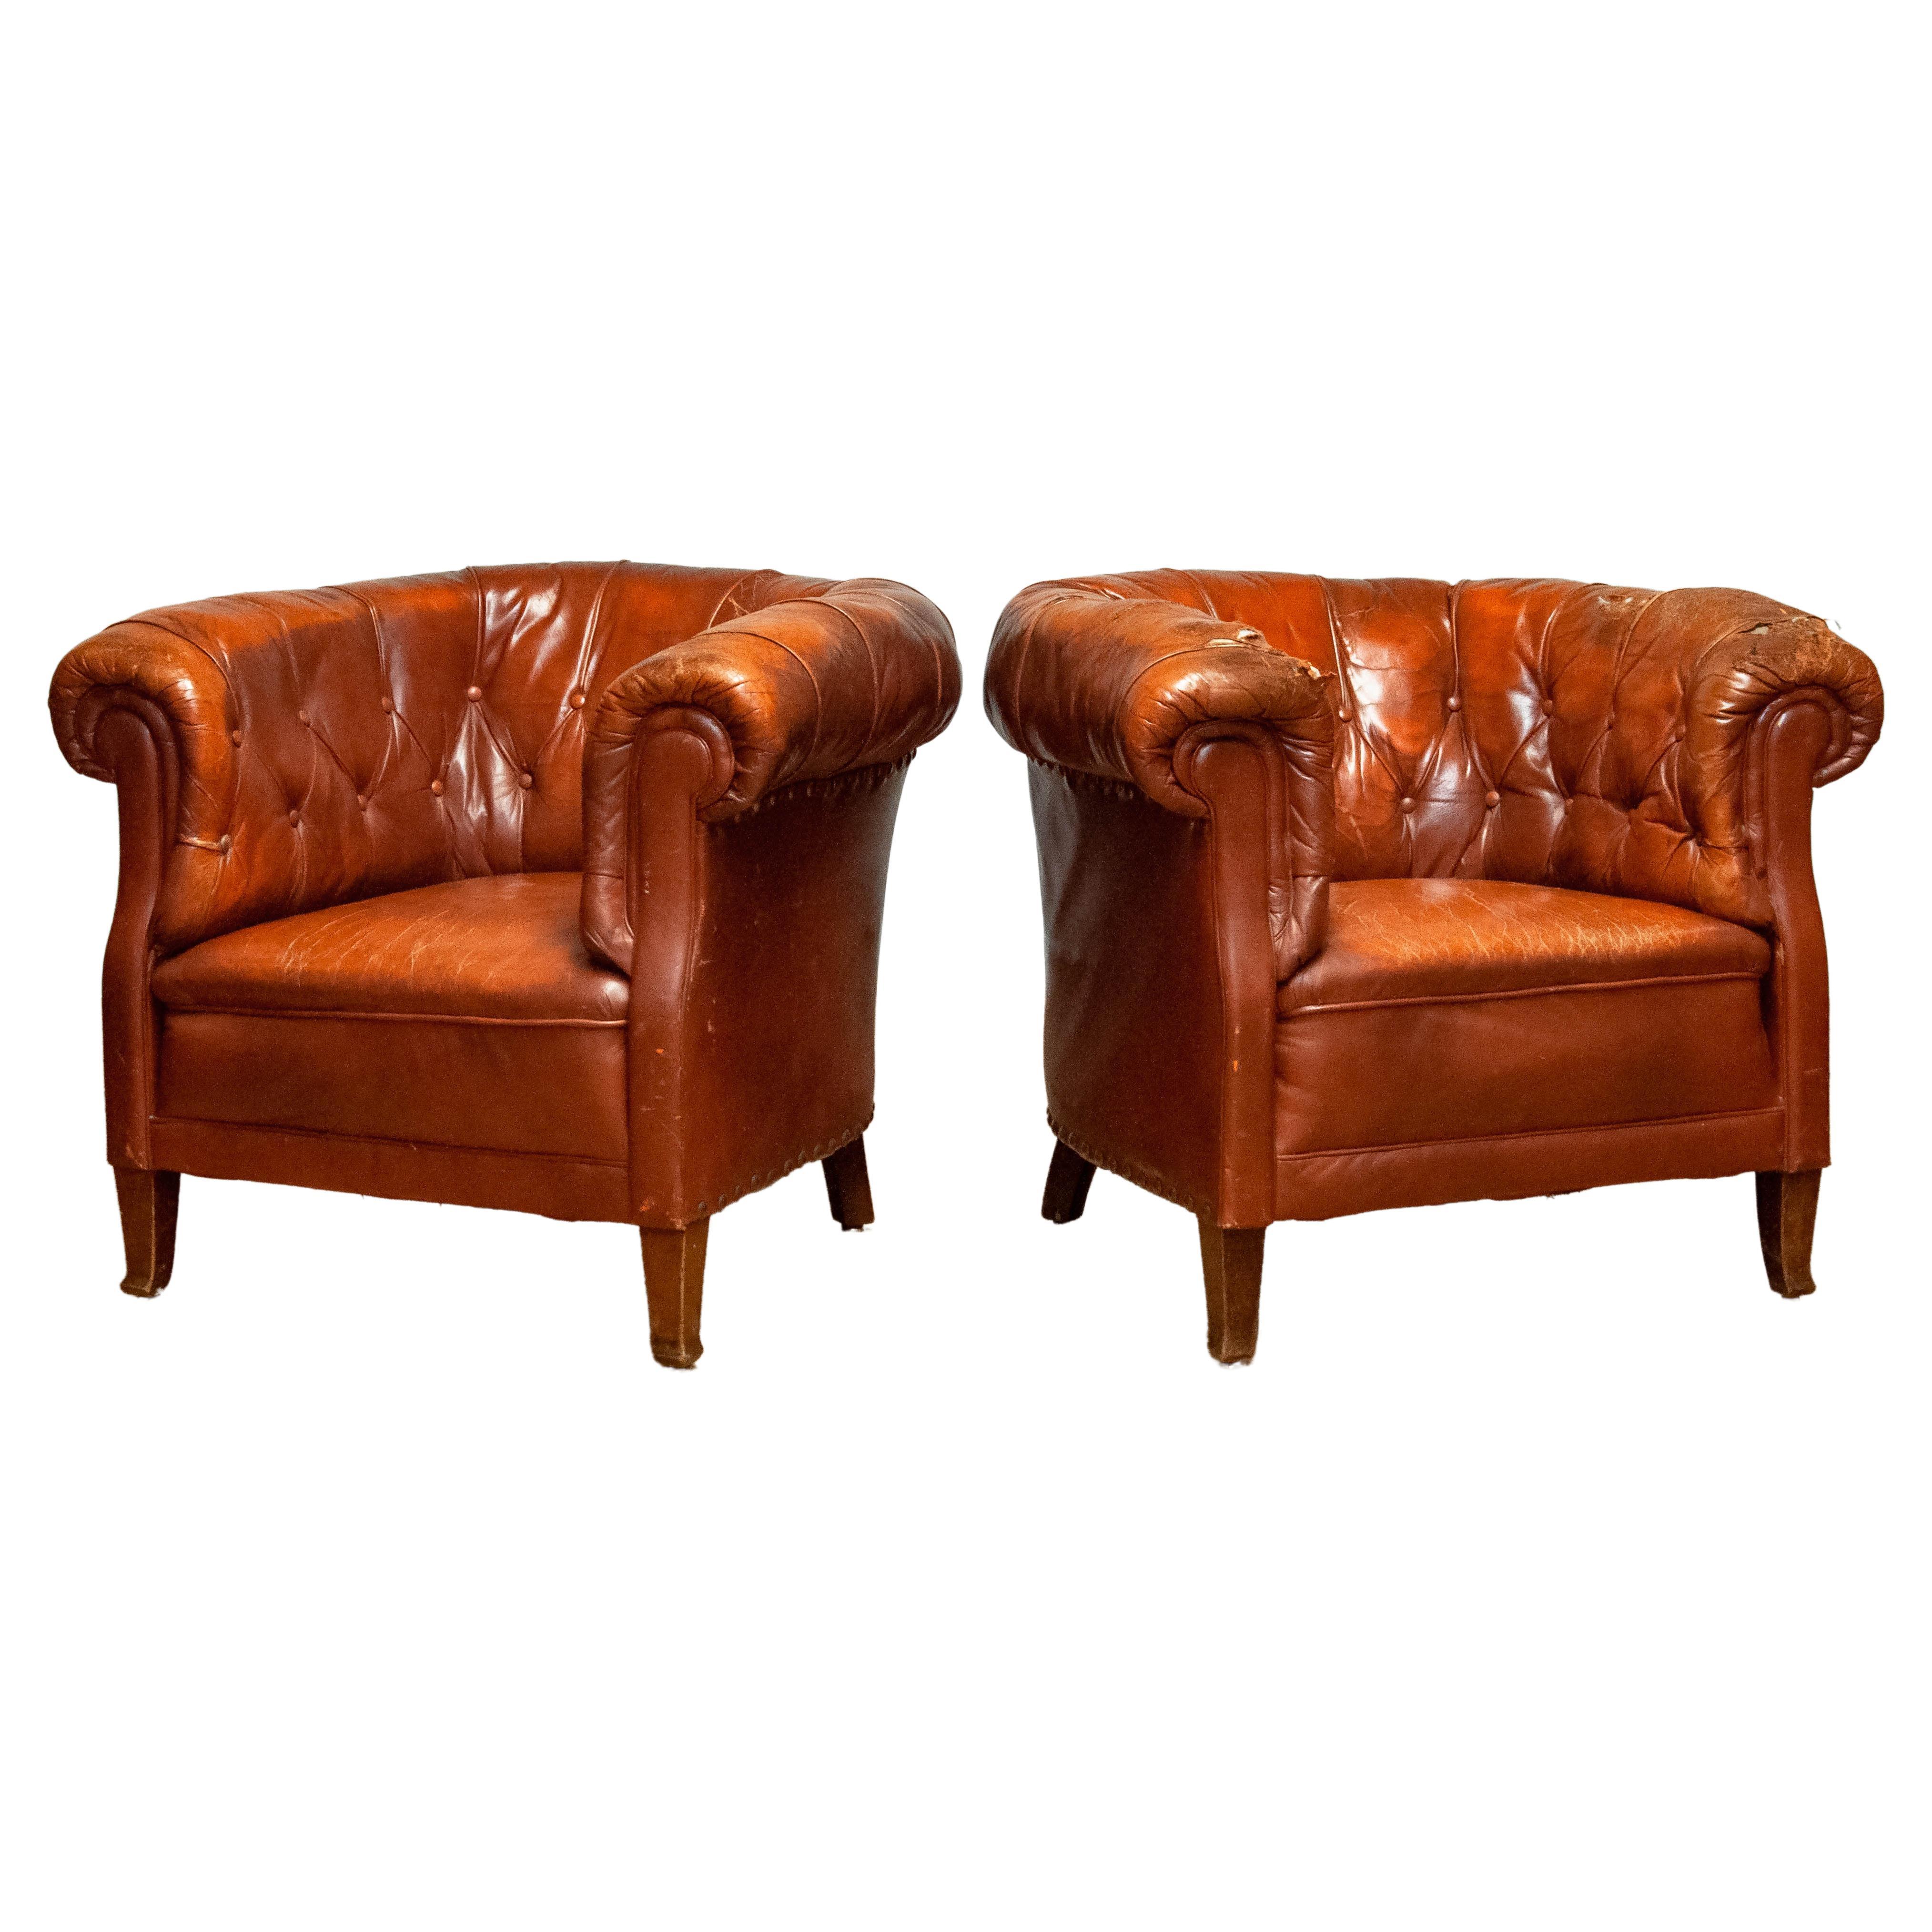 Pair 1940s Swedish Tufted Club Chair 'Chesterfield Model' Tan Brown Worn Leather